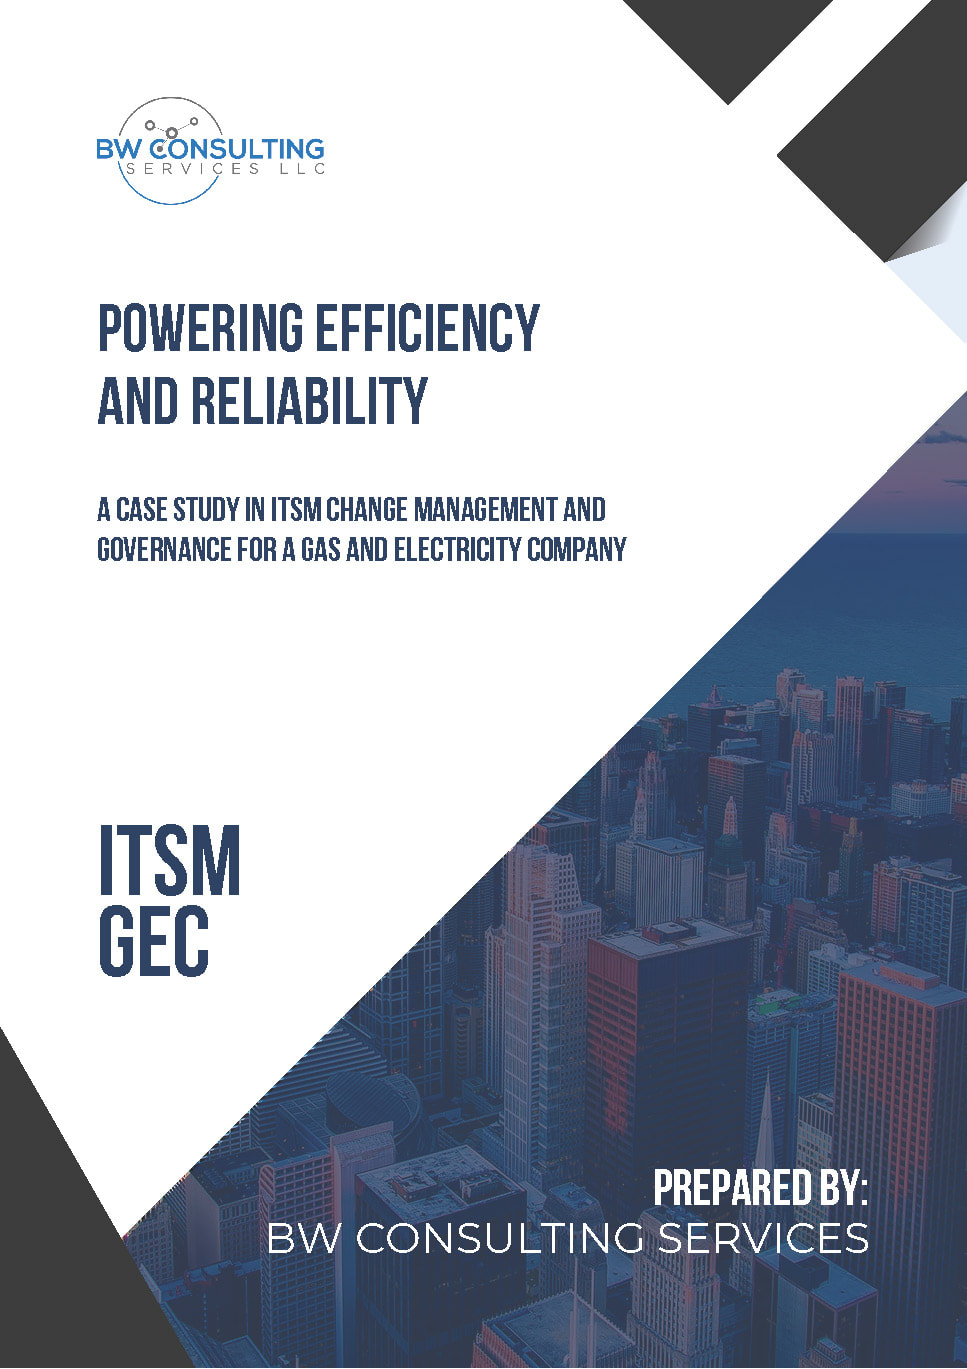 In the dynamic and regulated gas and electricity industry, effective Information Technology Service Management (ITSM) is crucial for ensuring a continuous and secure energy supply. This case study explores the successful transformation of ITSM Change Management and Governance Services within a prominent gas and electricity company. It highlights the company's efforts to adapt to shifting regulatory landscapes, technological advancements, and the demand for uninterrupted energy services.